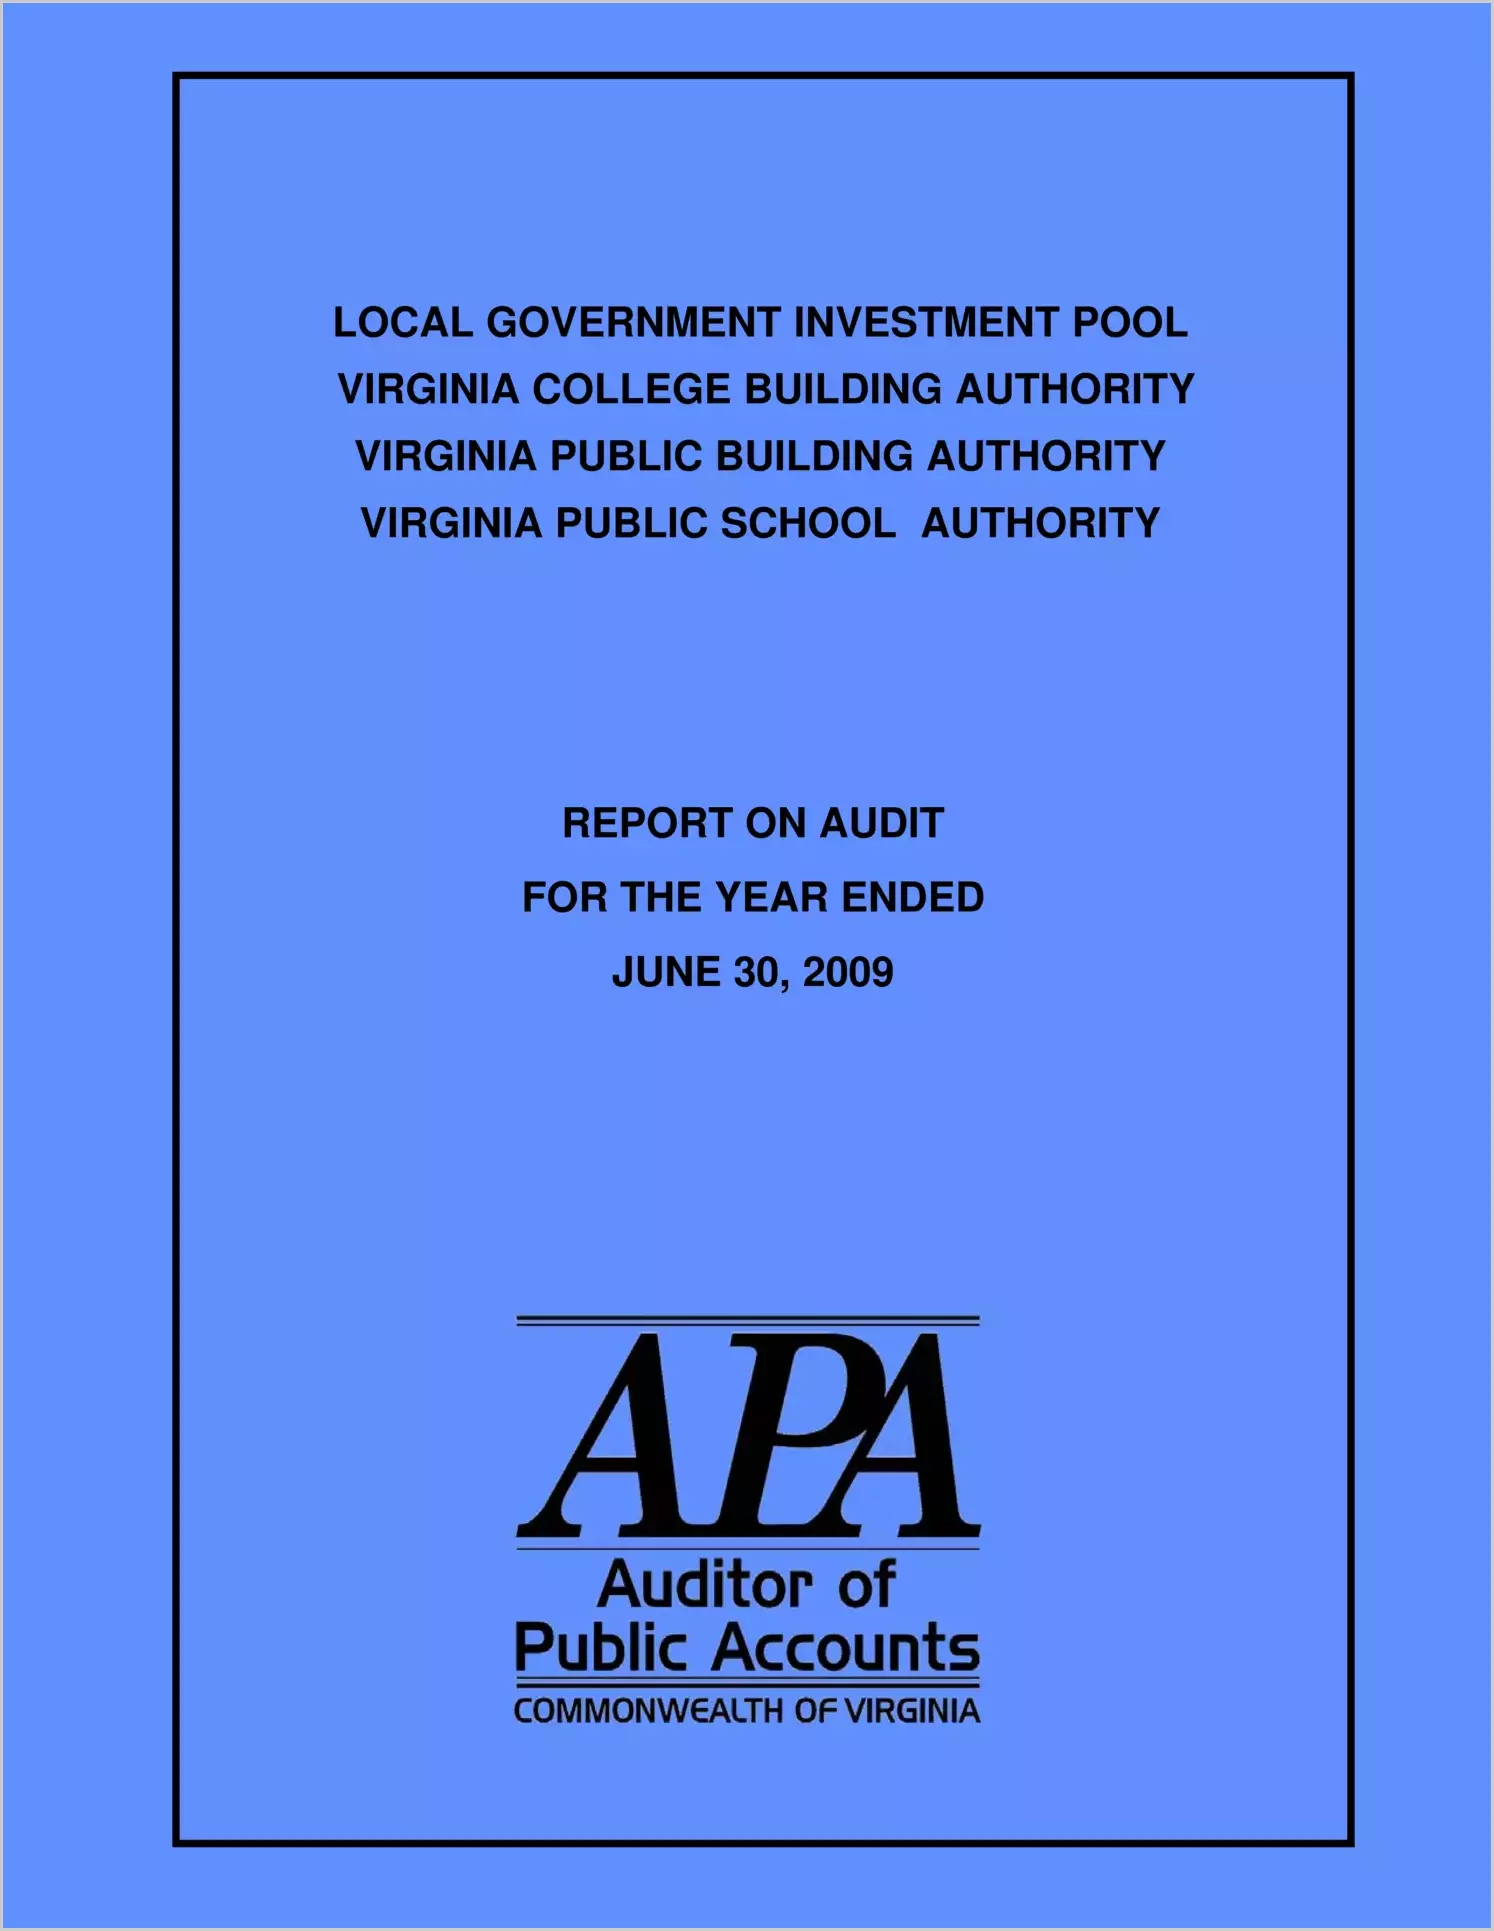 Local Government Investment Pool, Virginia College Building Authority, Virginia Public Building Authority, Virginia Public School Authority Report on Audit for Period Ended June 30, 2009